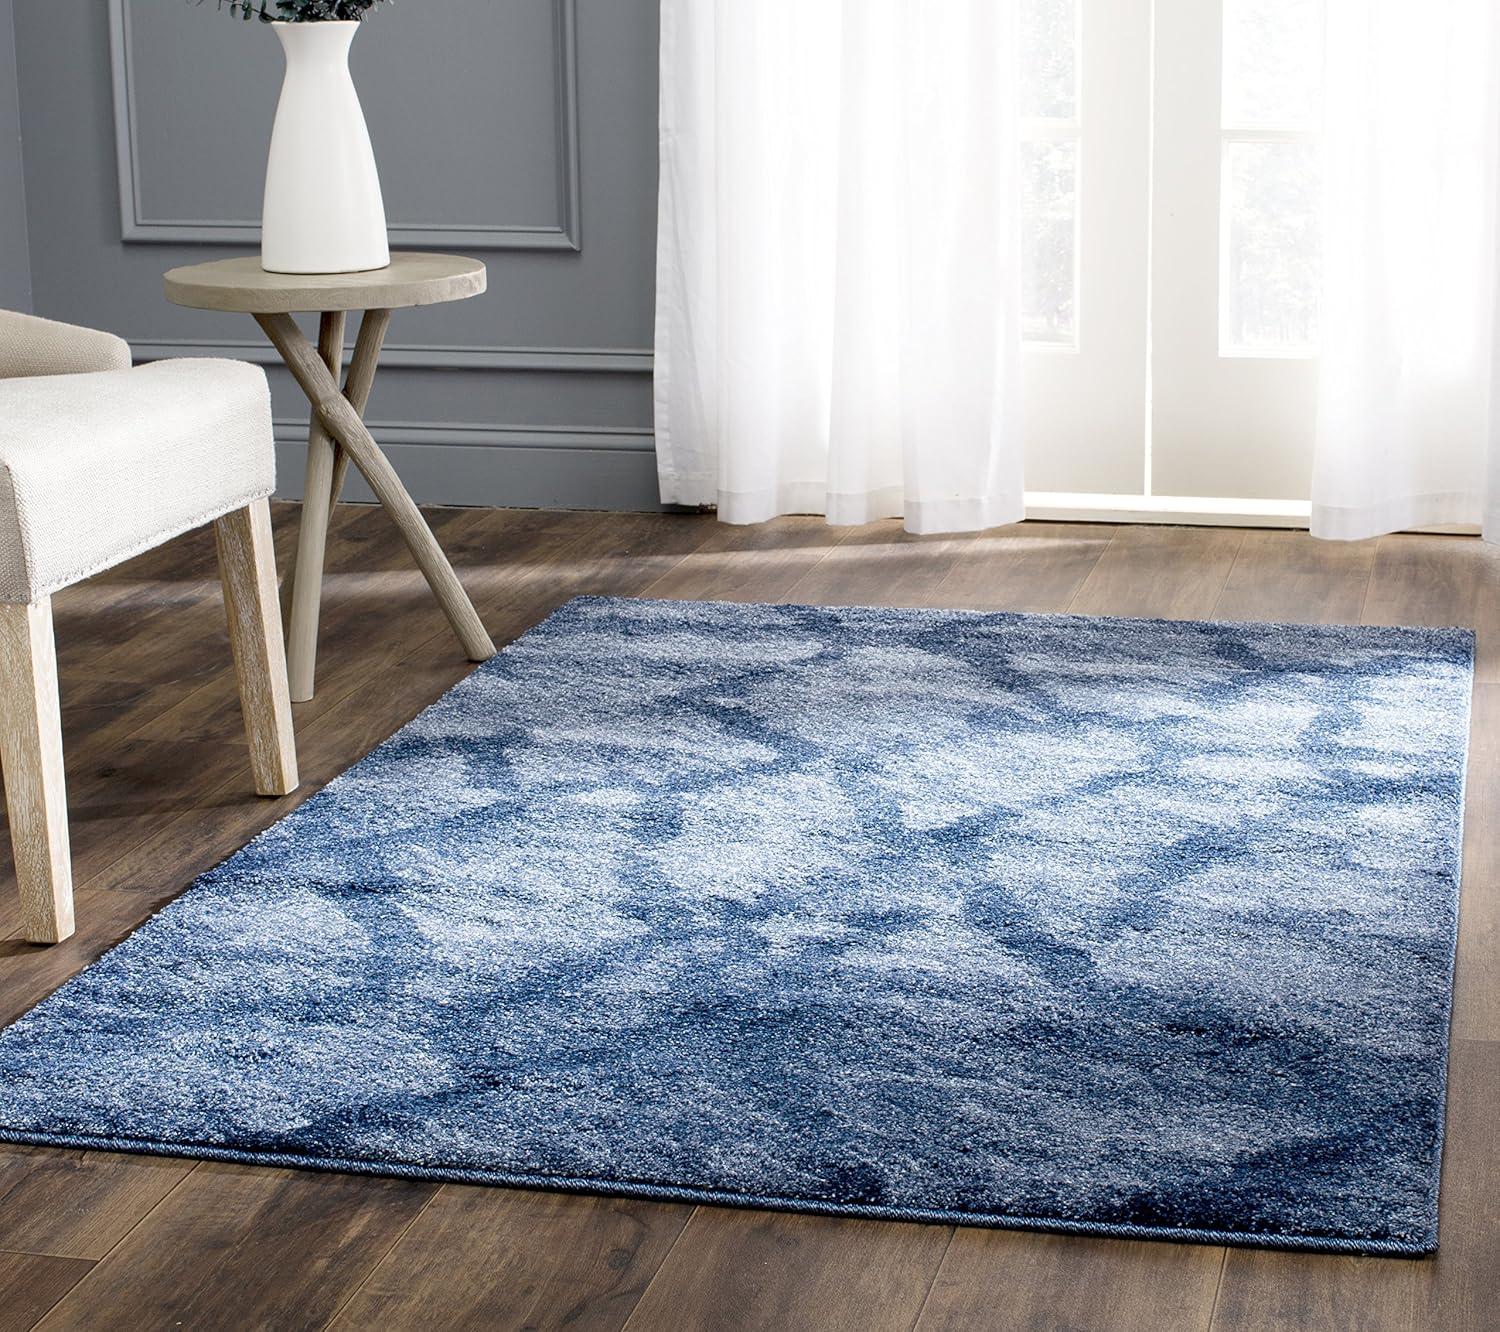 Abstract Blue Hues Round Shag Rug - Easy Care Synthetic 59"